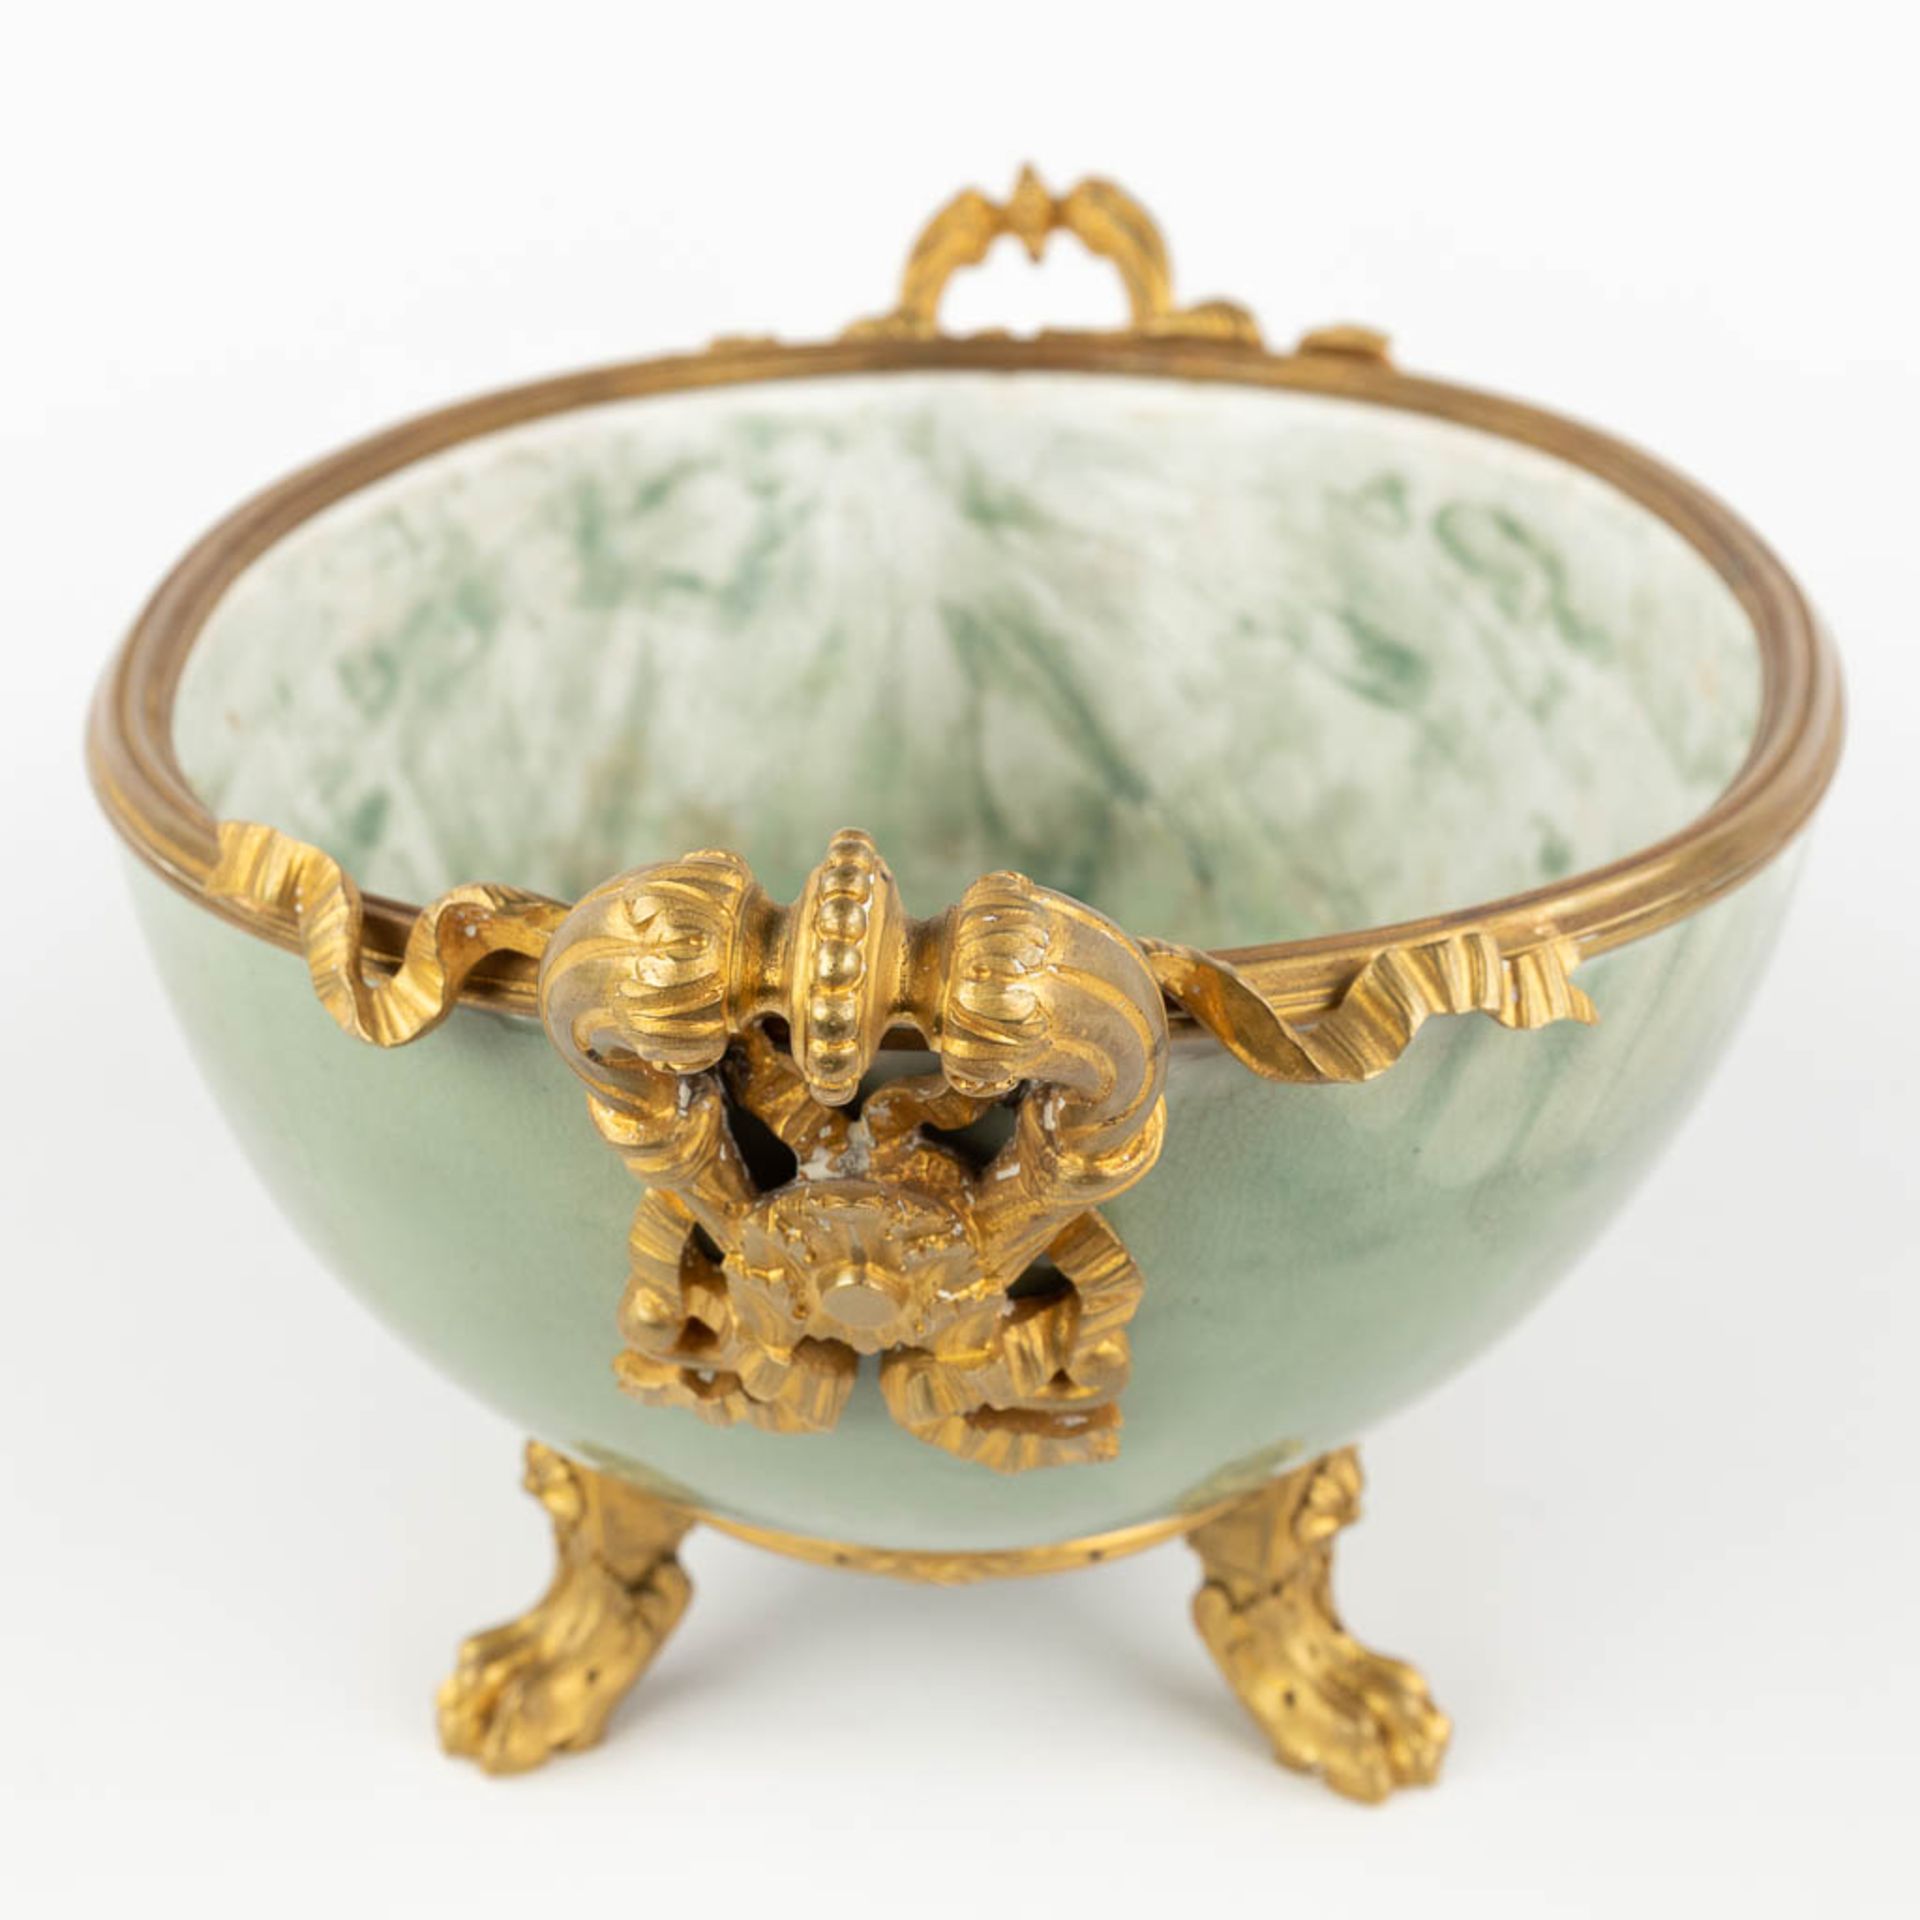 A large bowl mounted with gilt bronze. Glazed stoneware. (D:26 x W:47 x H:20 cm) - Image 6 of 10